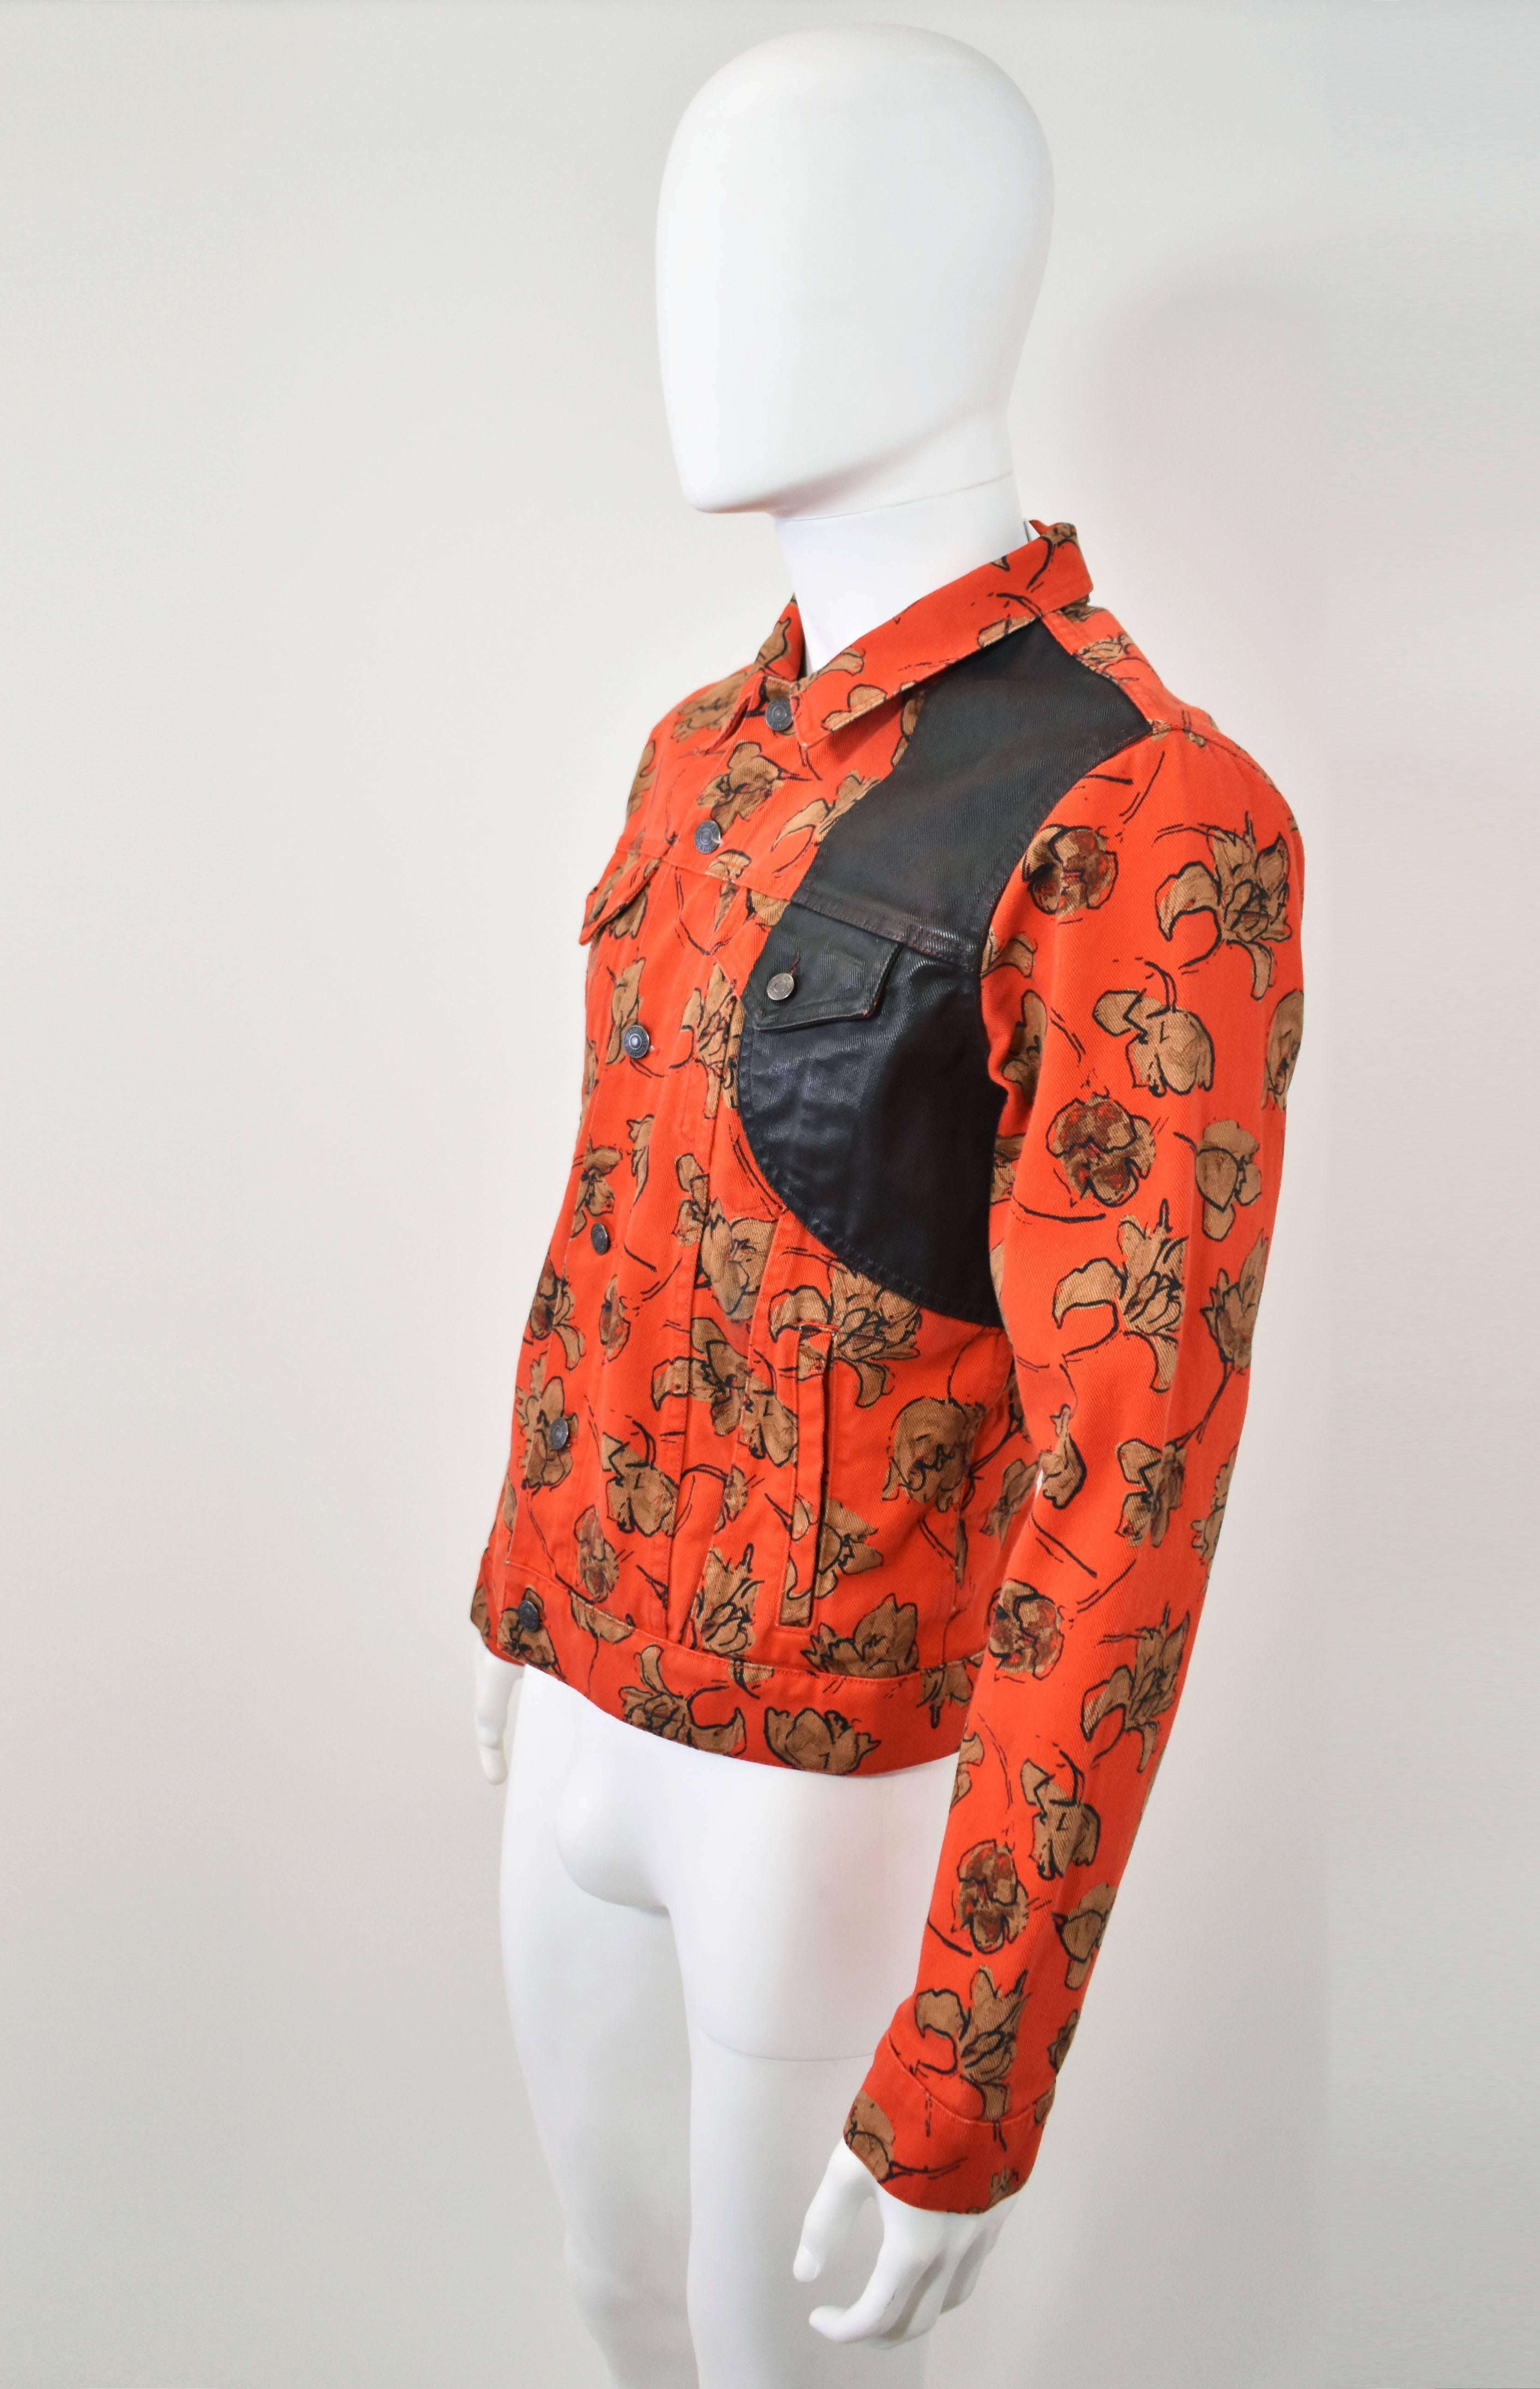 An orange floral print denim jacket with concealed belt and waxed cotton panel  by Dries Van Noten. The piece is in excellent condition

Length - 25.5
Bust - 42
Waist - 36
Hips - 37
Sleeve Length - 26